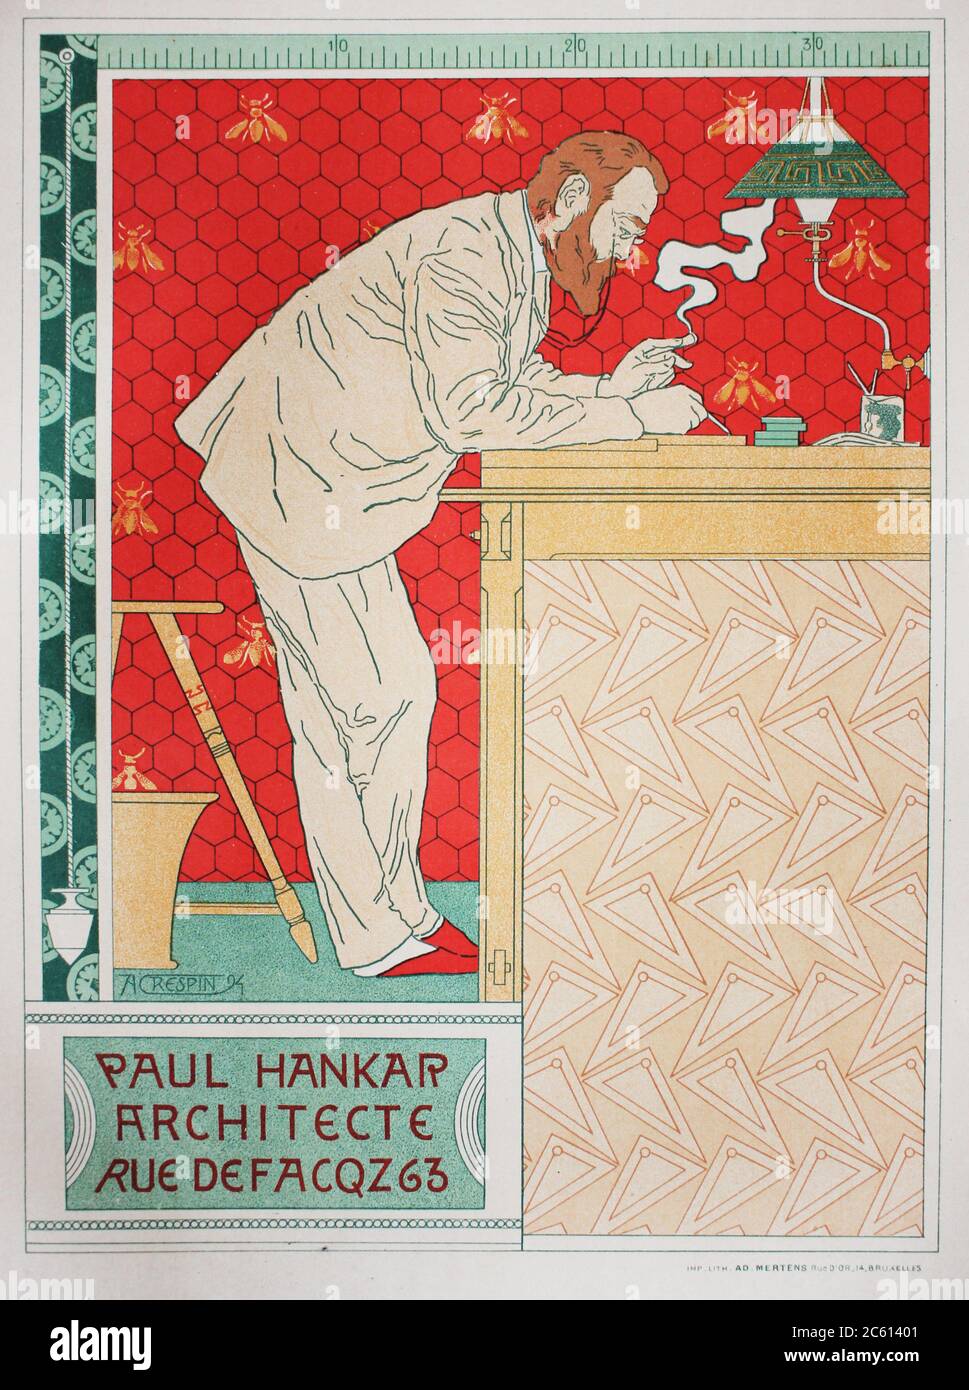 The adverising poster of the architect in the vintage book Les Maitres de L'Affiche, by Roger Marx, 1897. Stock Photo